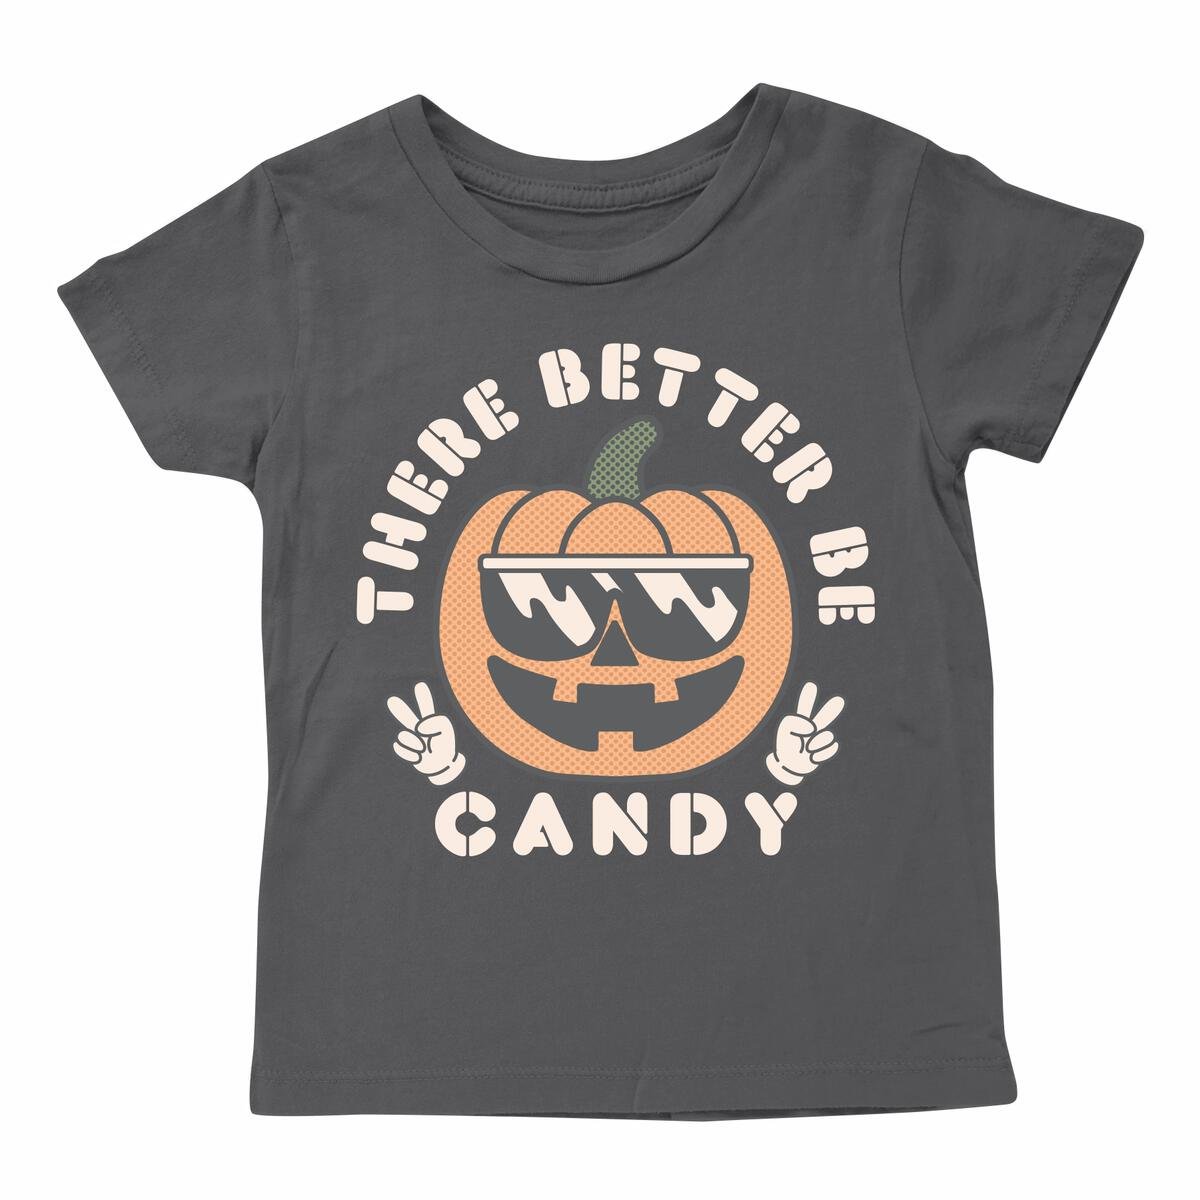 BETTER BE CANDY TSHIRT (PREORDER) - TINY WHALES